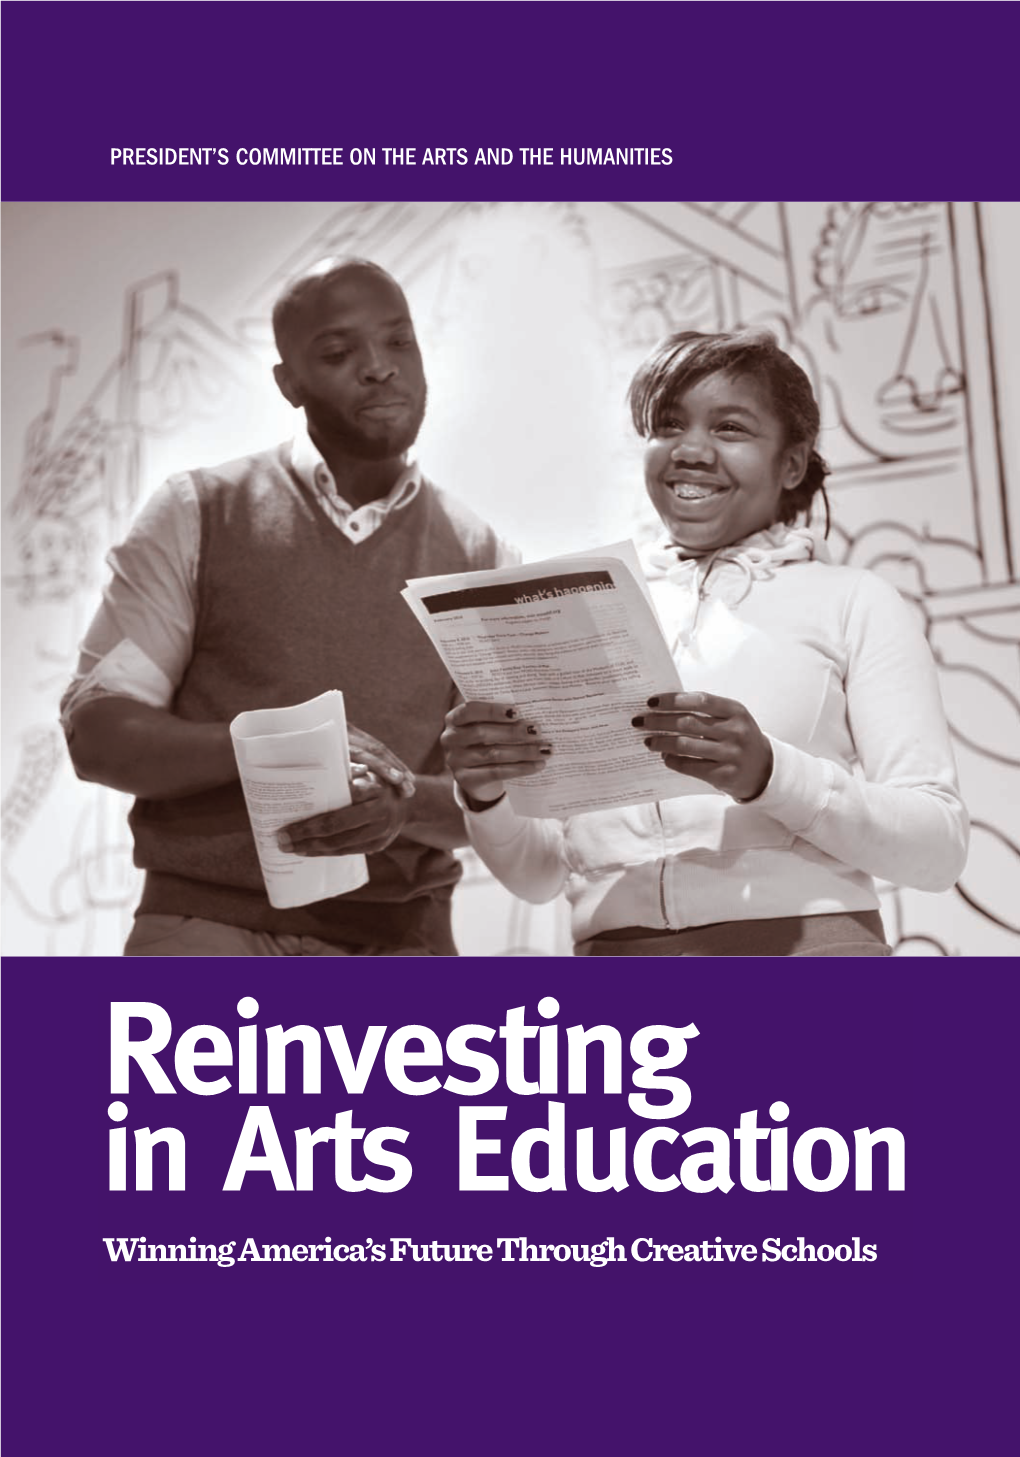 Reinvesting in Arts Education